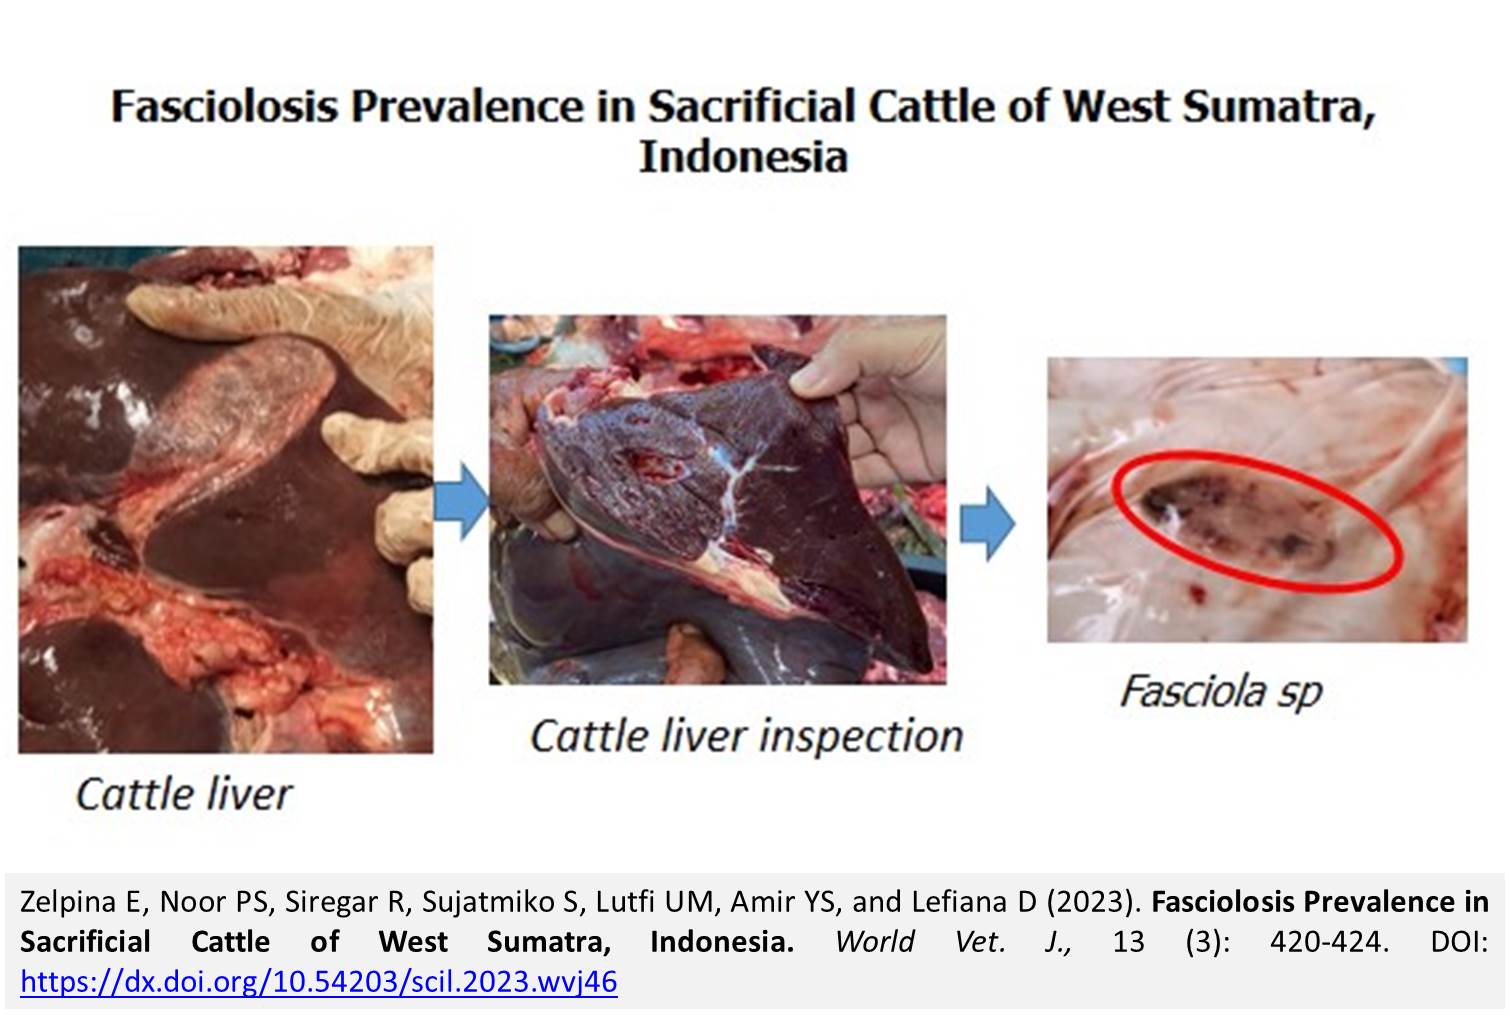 1900-28-Fasciolosis_Prevalence_in_Sacrificial_Cattle